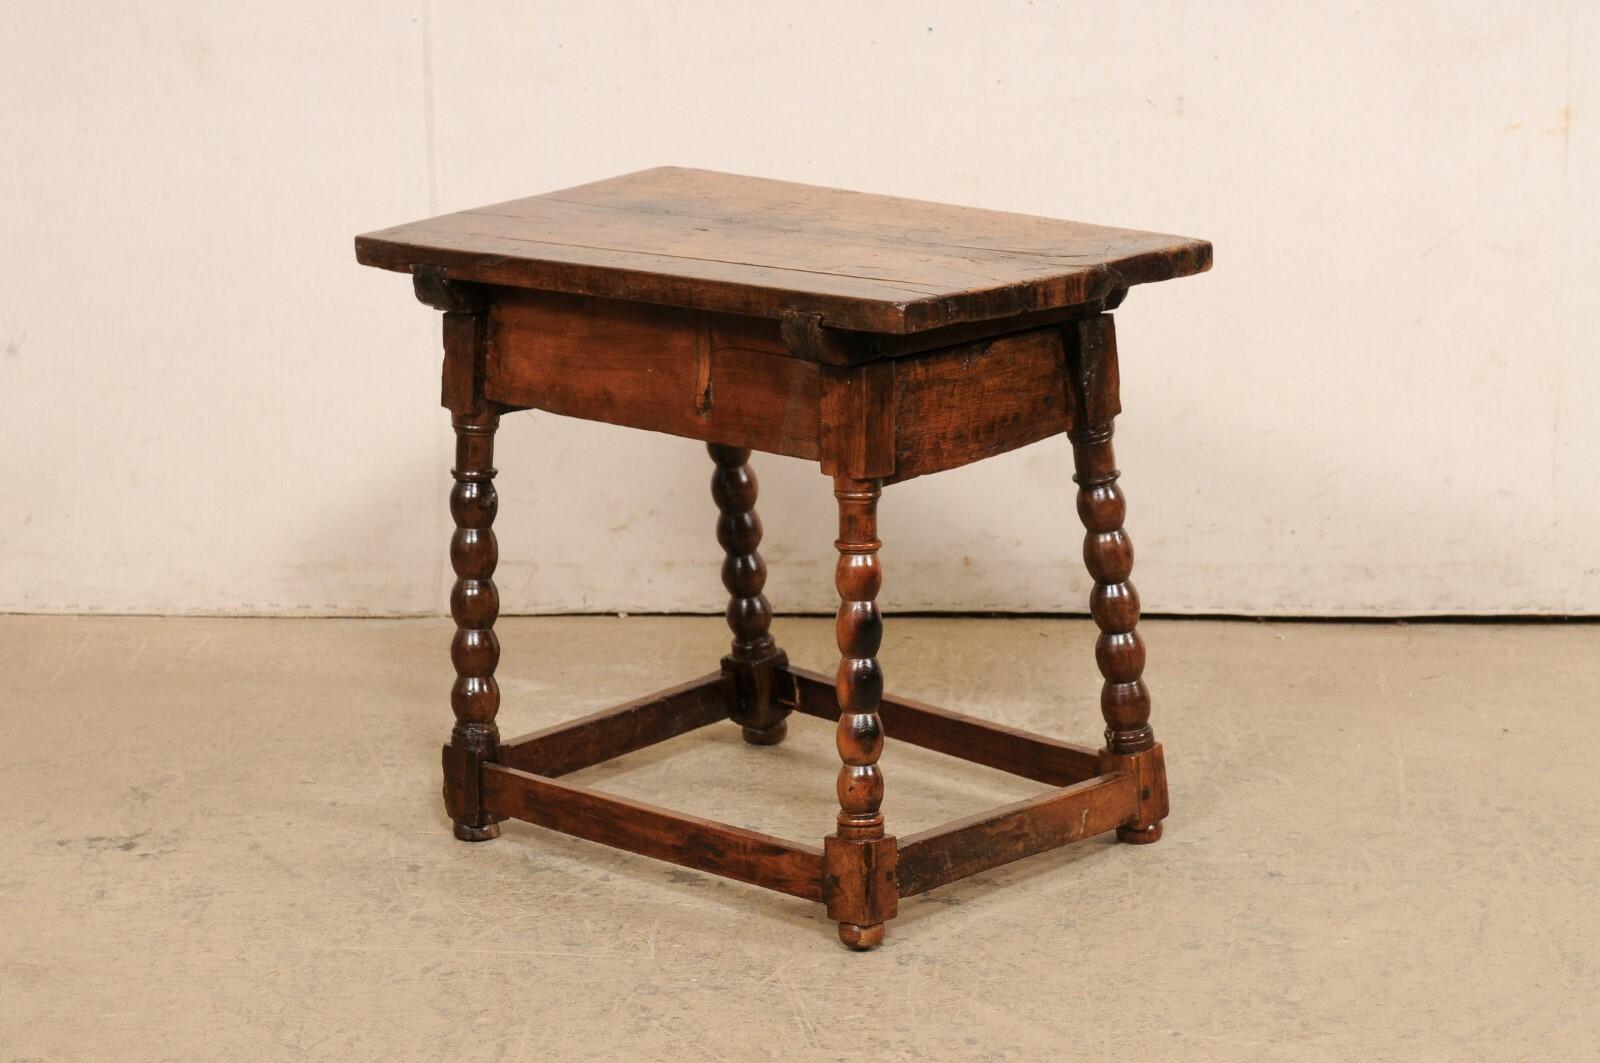 A Spanish occasional table with drawer, from the turn of the 18th and 19th century. This antique table from Spain has a rectangular-shaped top, which overhangs the apron below which houses a single dovetailed-drawer at one long side, which is adorn